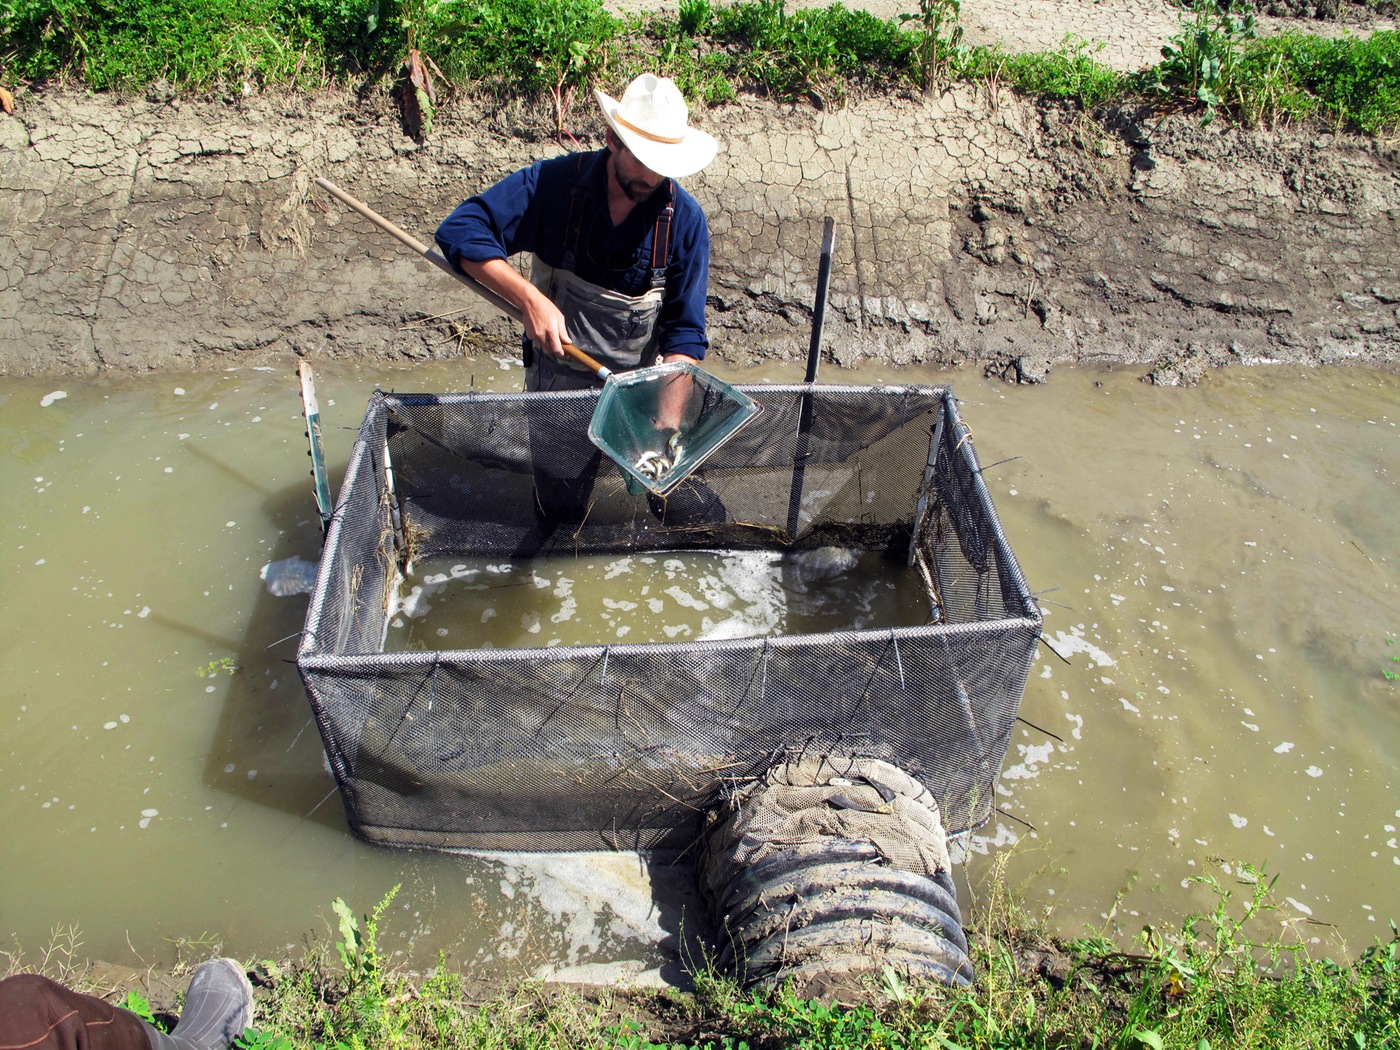 Biologist Jacob Katz counts juvenile salmon being trapped as water drains from a flooded rice field near Woodland, California. (Tracie Cone, AP)